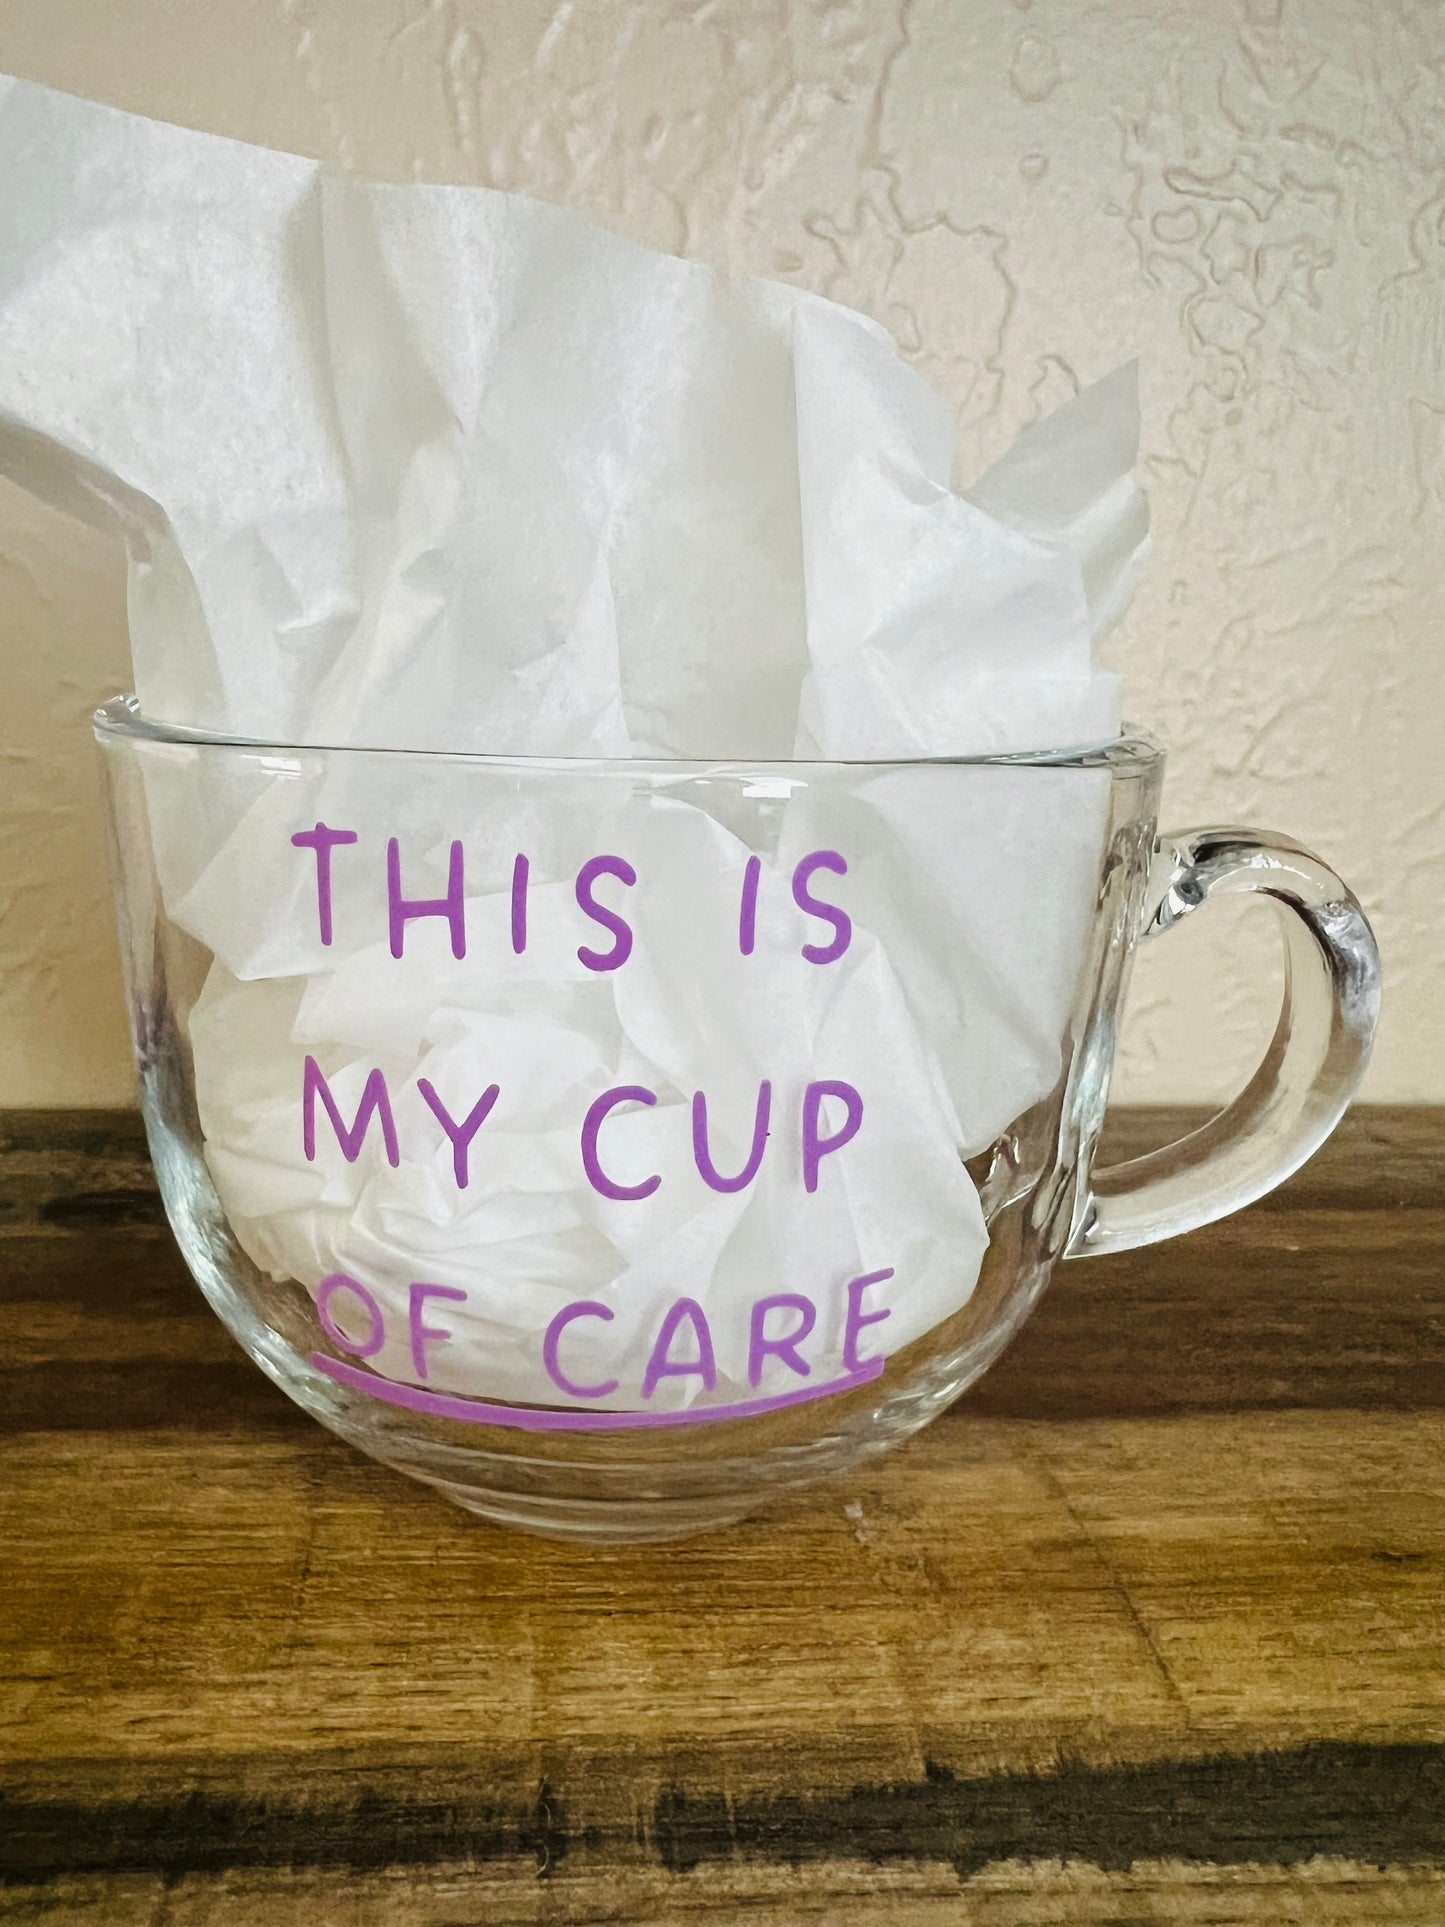 Cup of care!